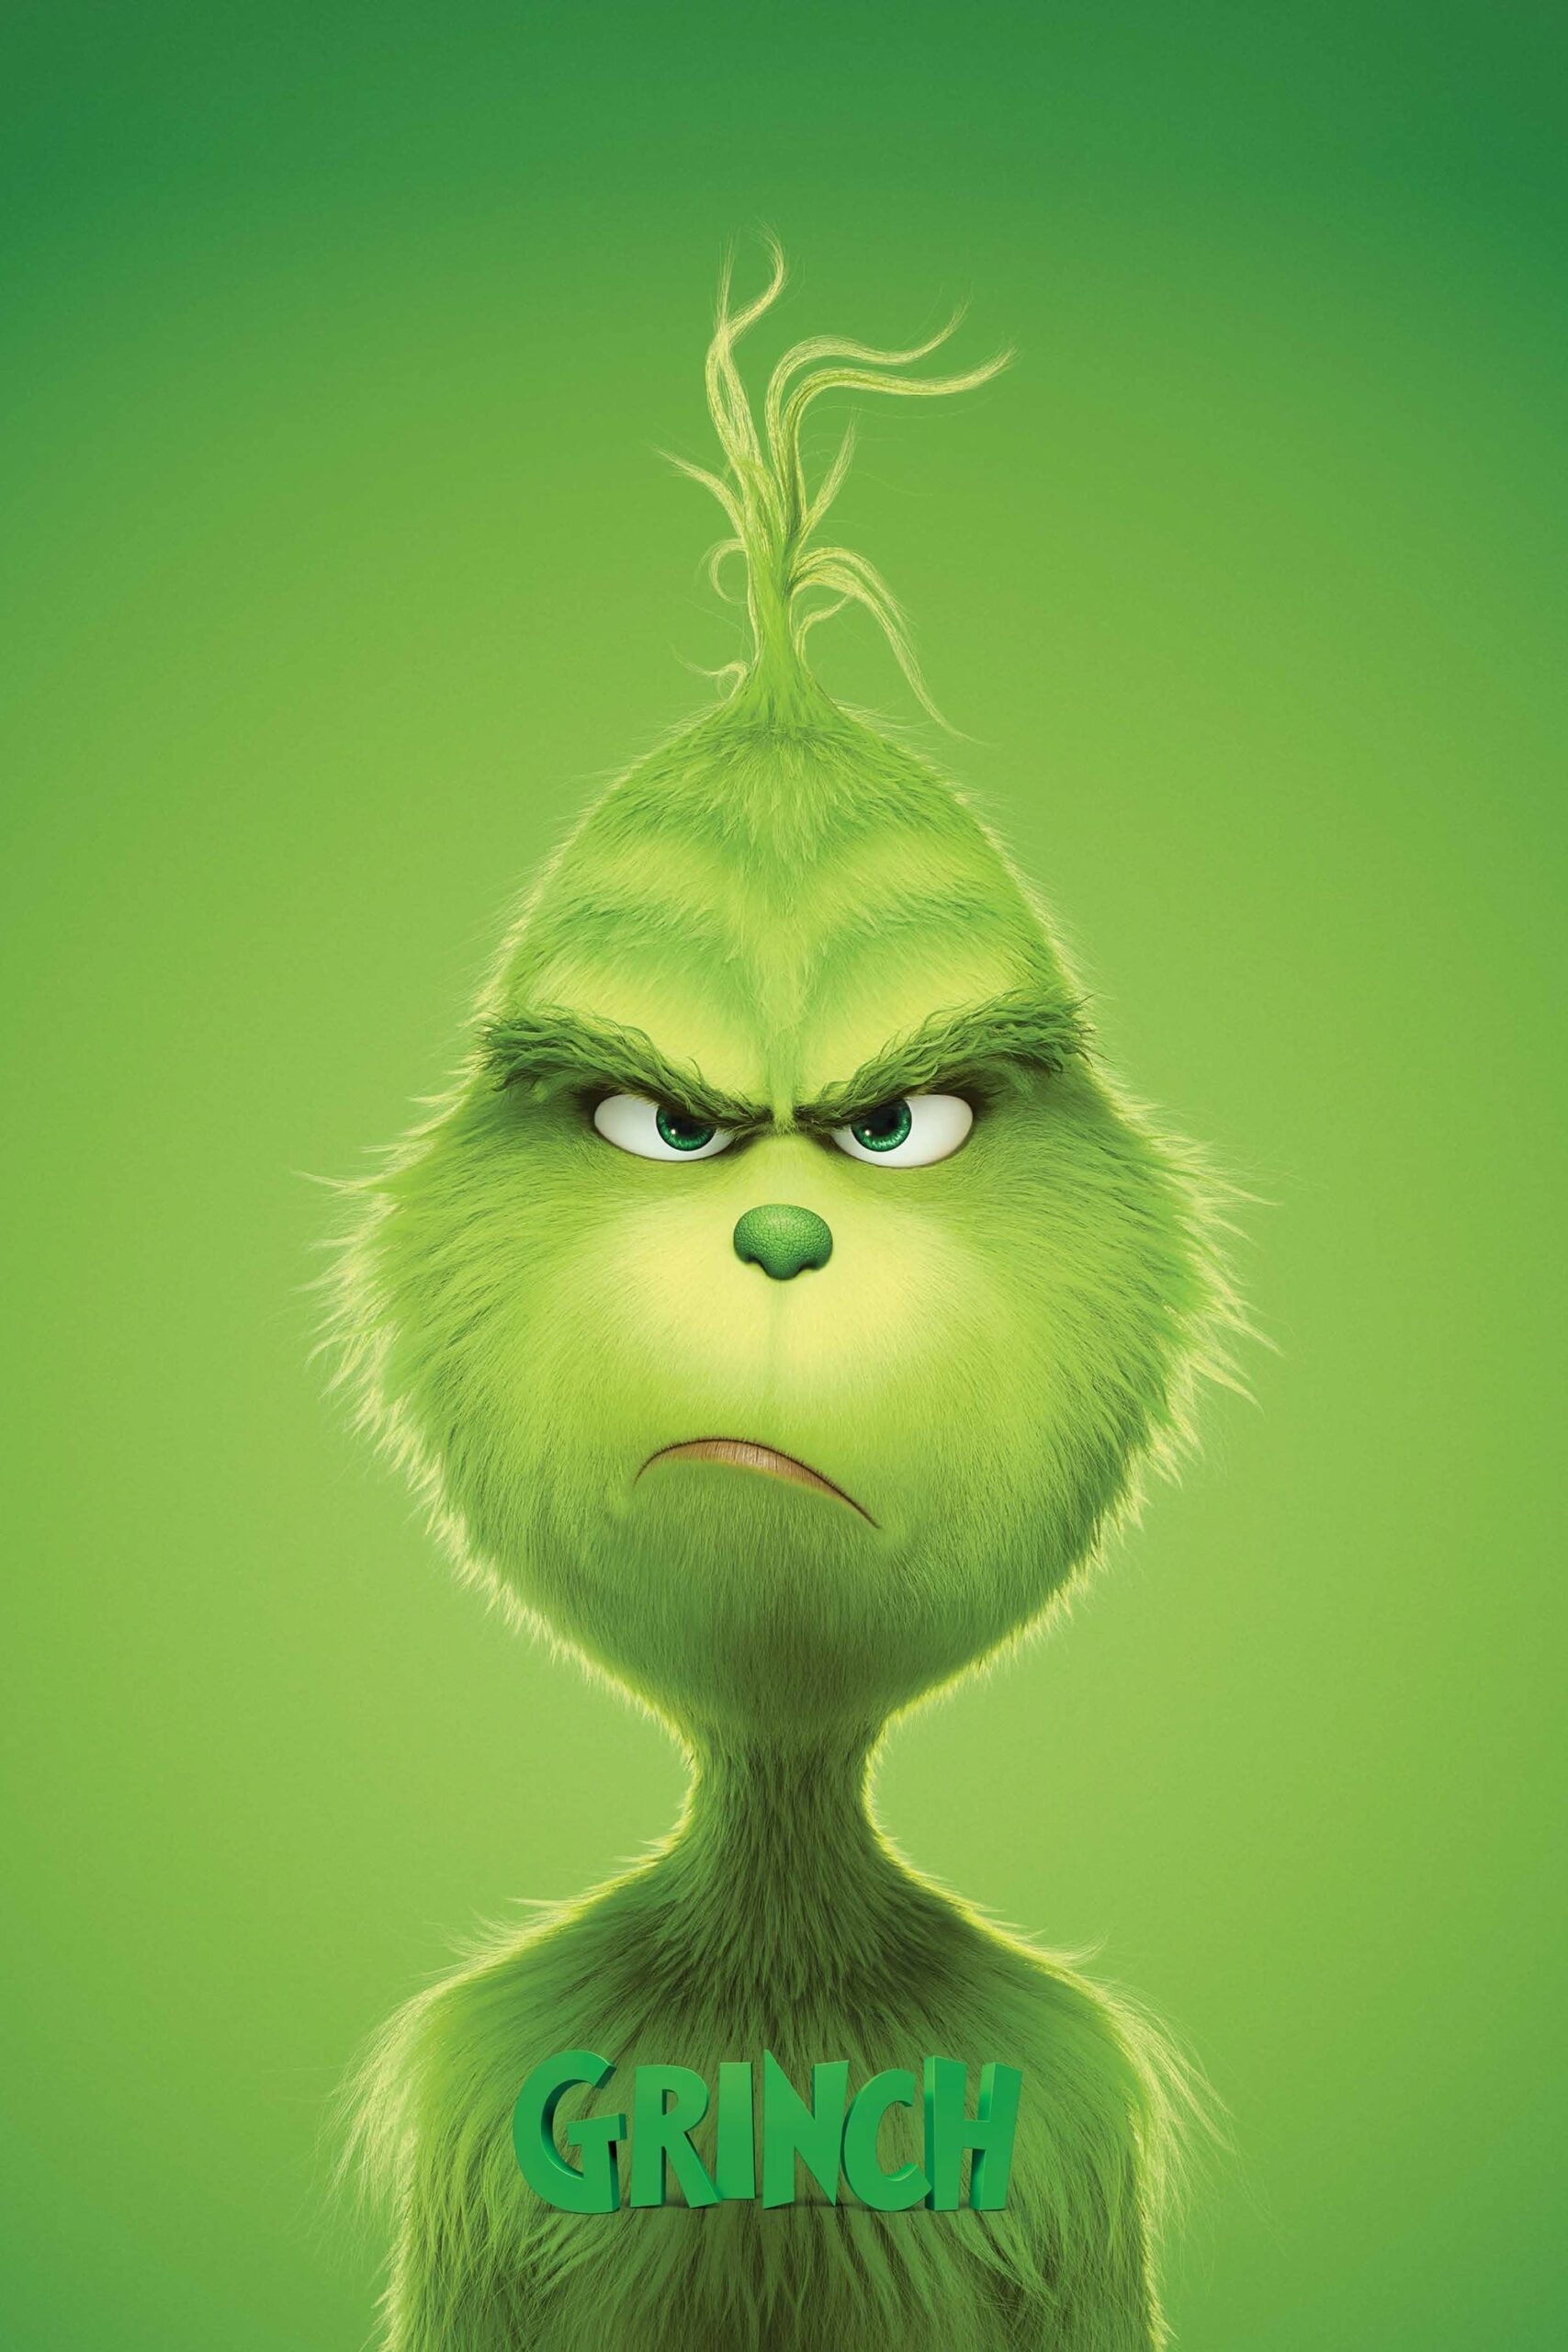 Poster for the movie "Grinch"